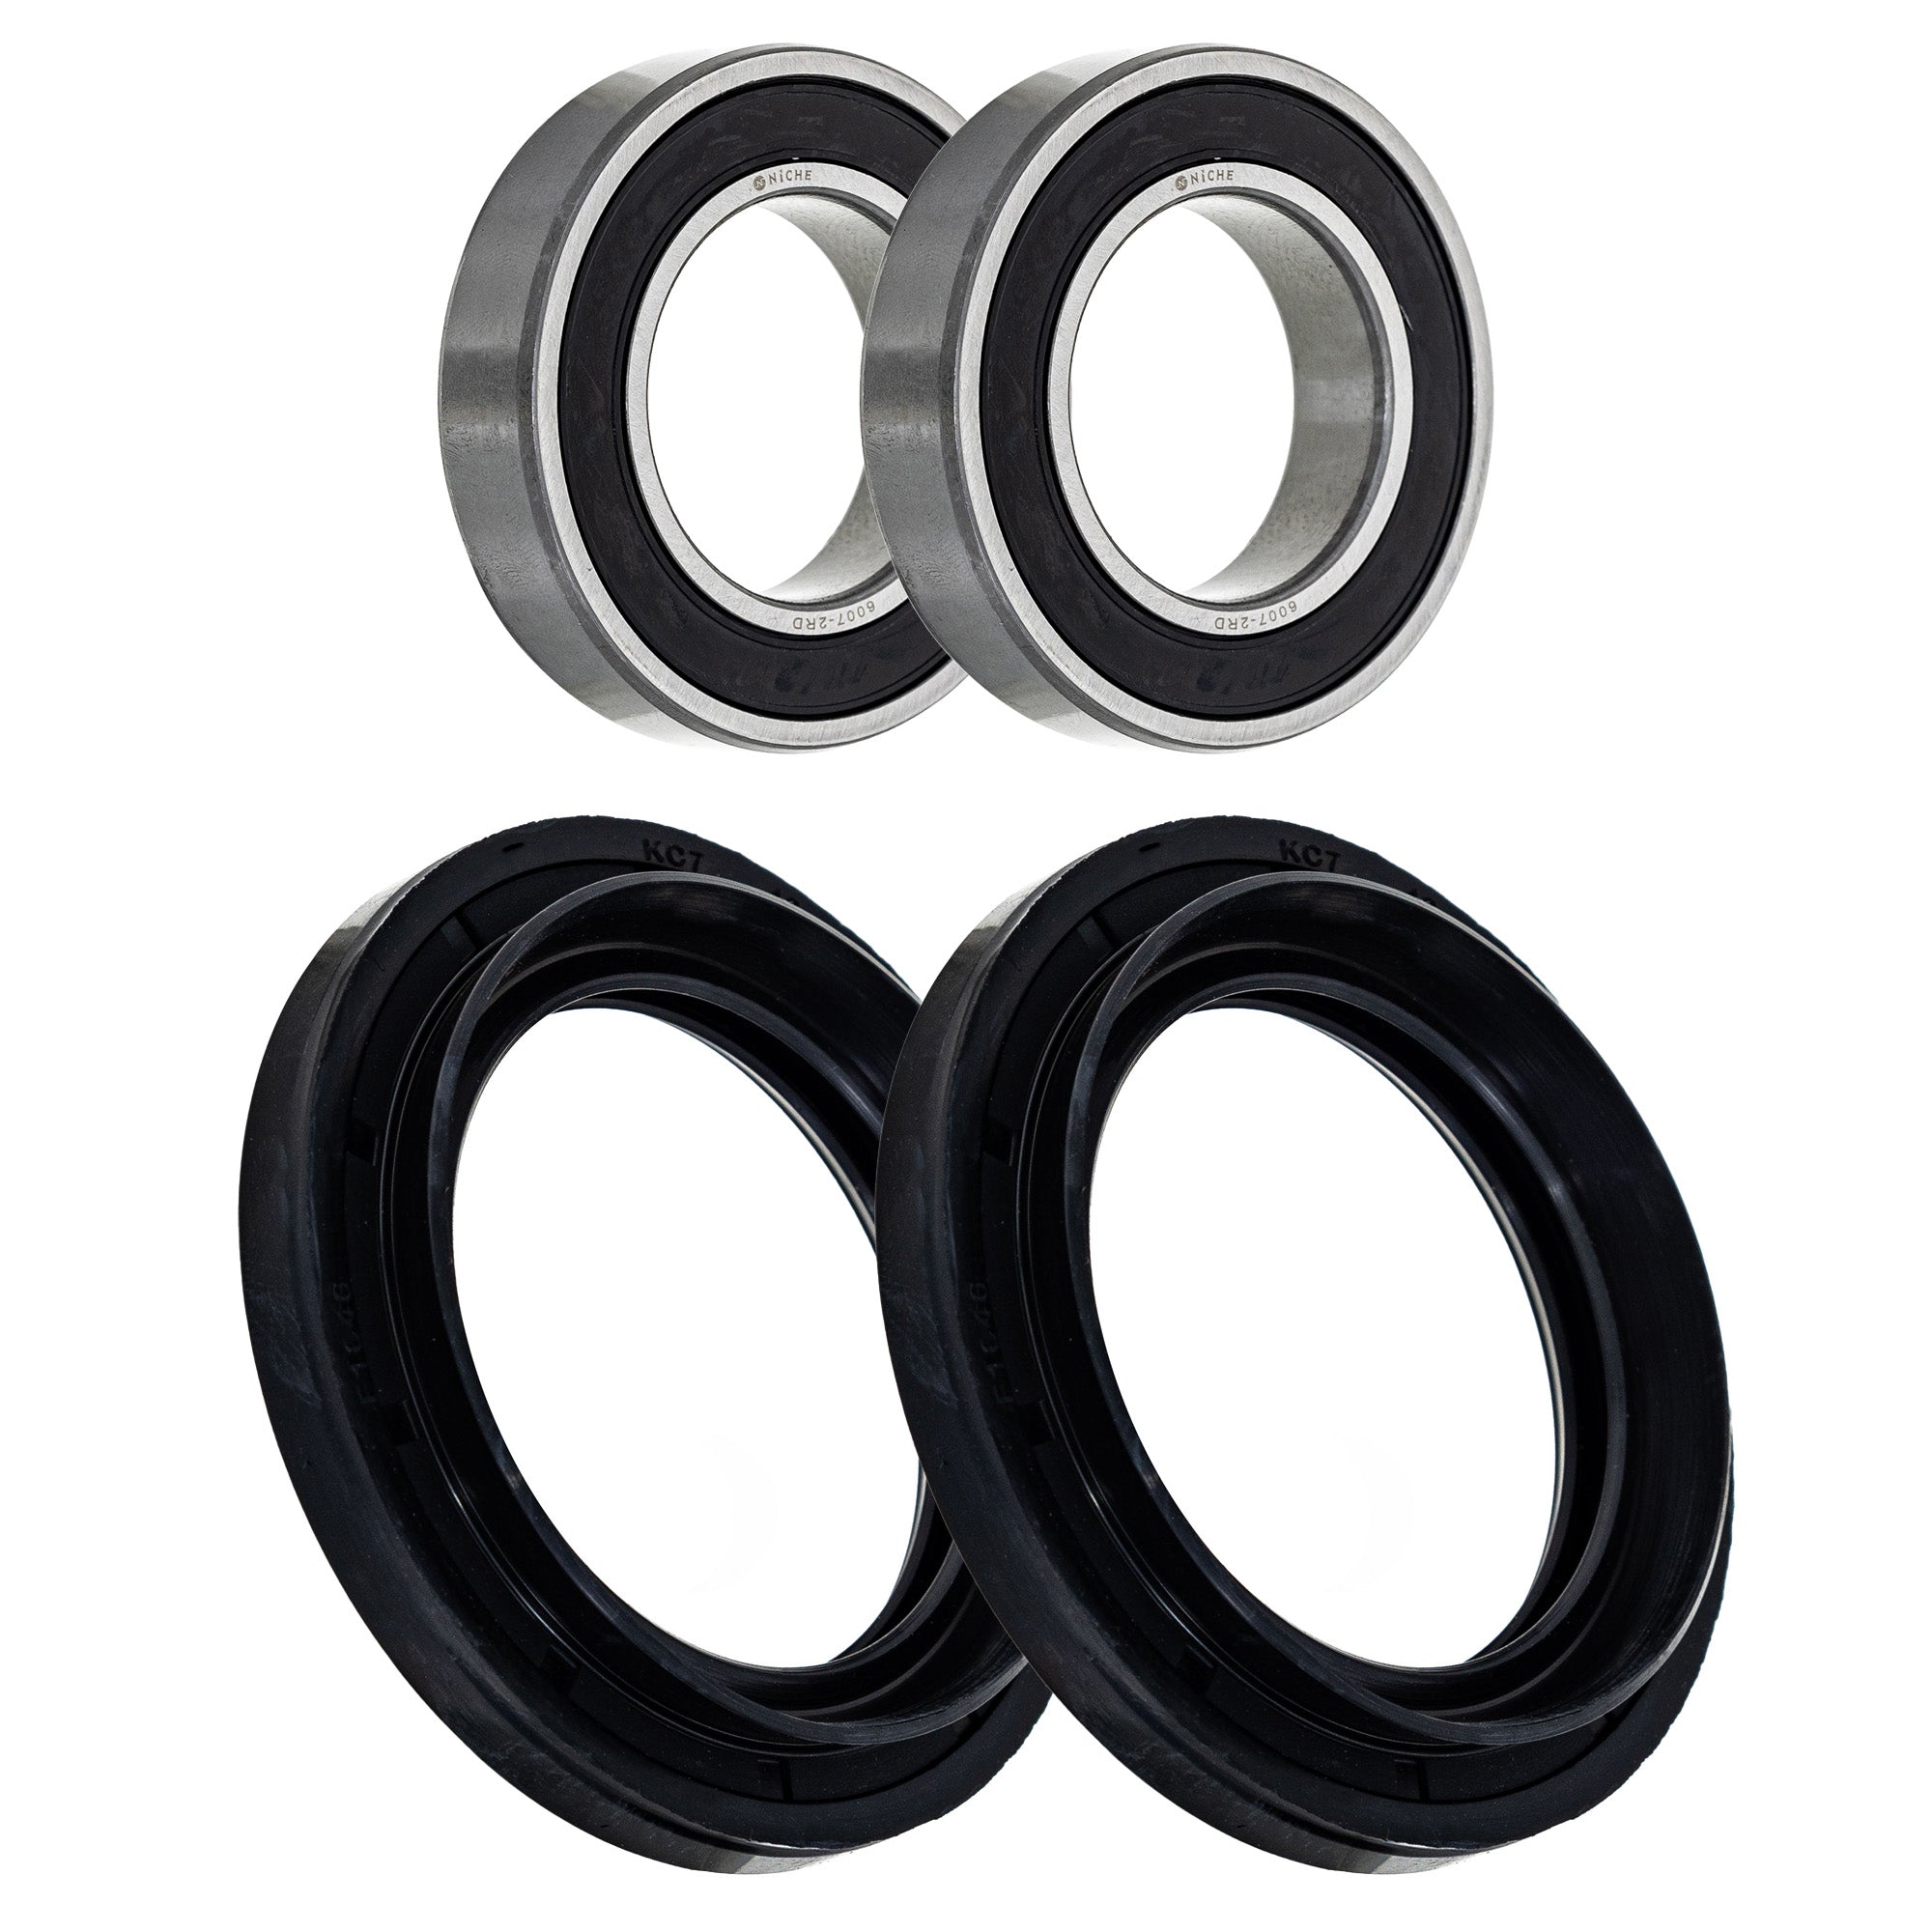 Wheel Bearing Seal Kit for zOTHER Grizzly Banshee NICHE MK1009201